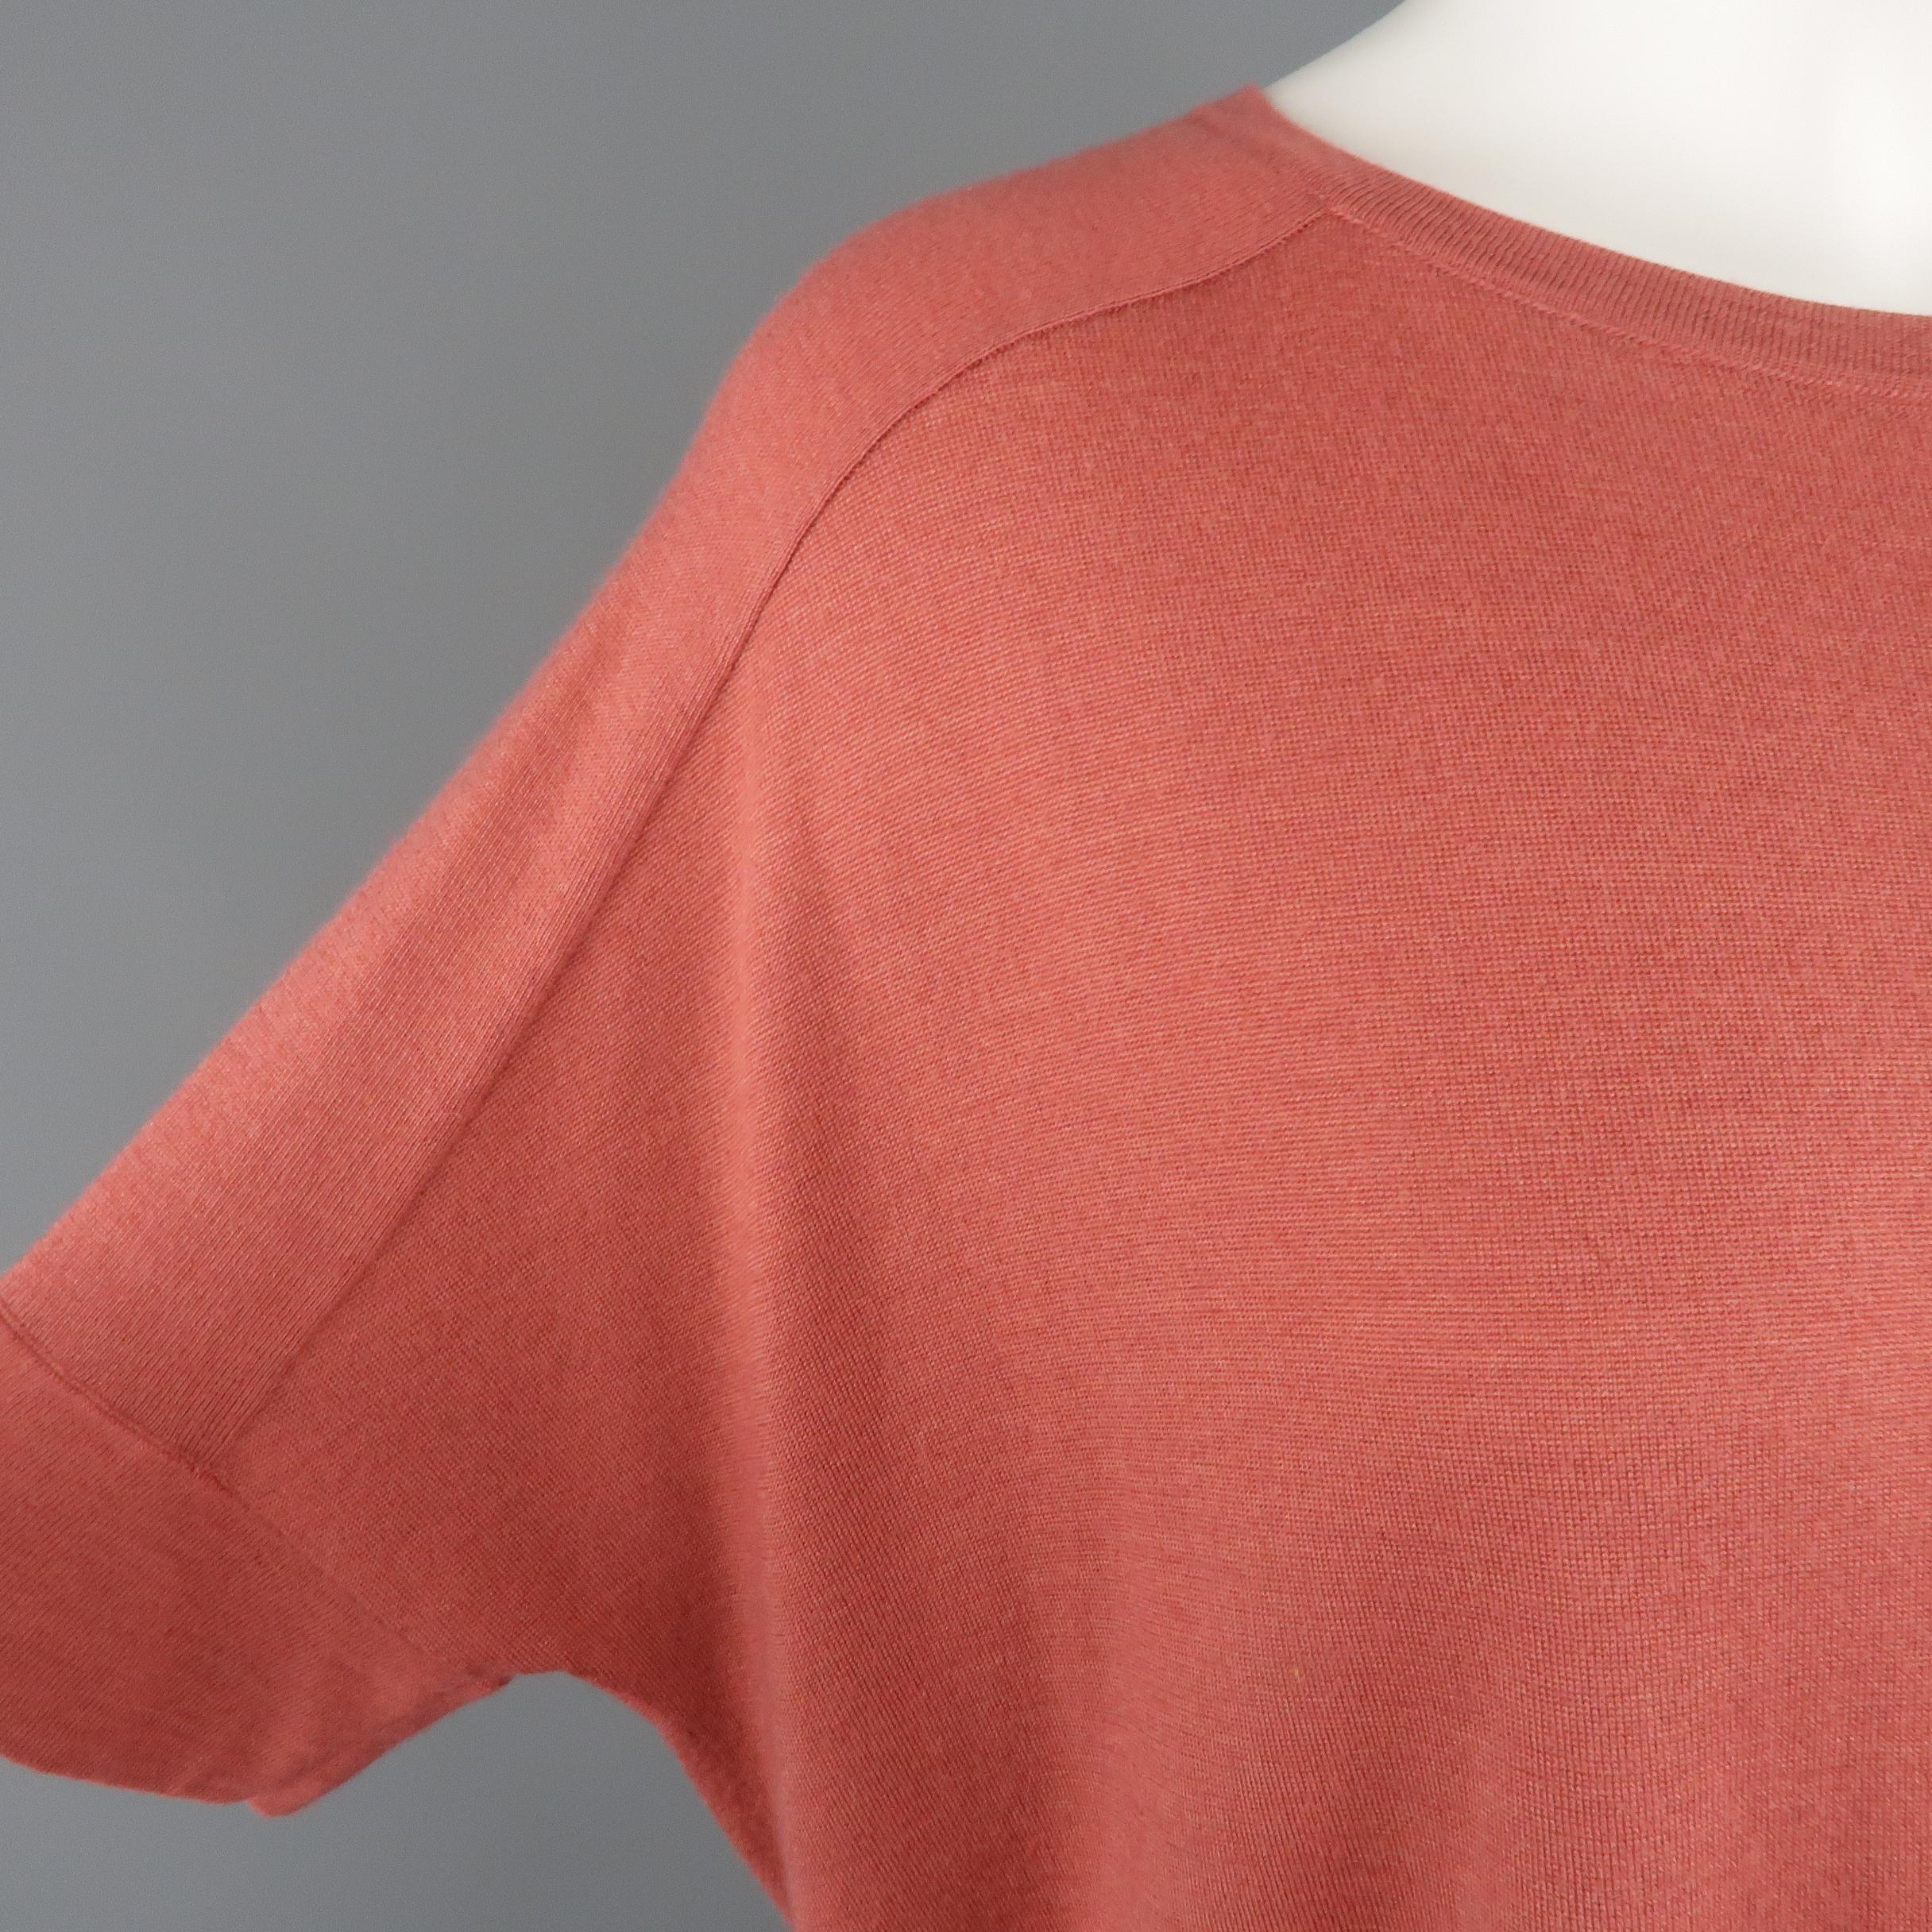 BRUNELLO CUCINELLI pullover sweater come sin a muted red light weight cashmere silk blend knit with a round neck, short raglan seam sleeves, and oversized silhouette. Made in Italy.
 
Excellent Pre-Owned Condition. Retails: $1,795.00.
Marked: M
